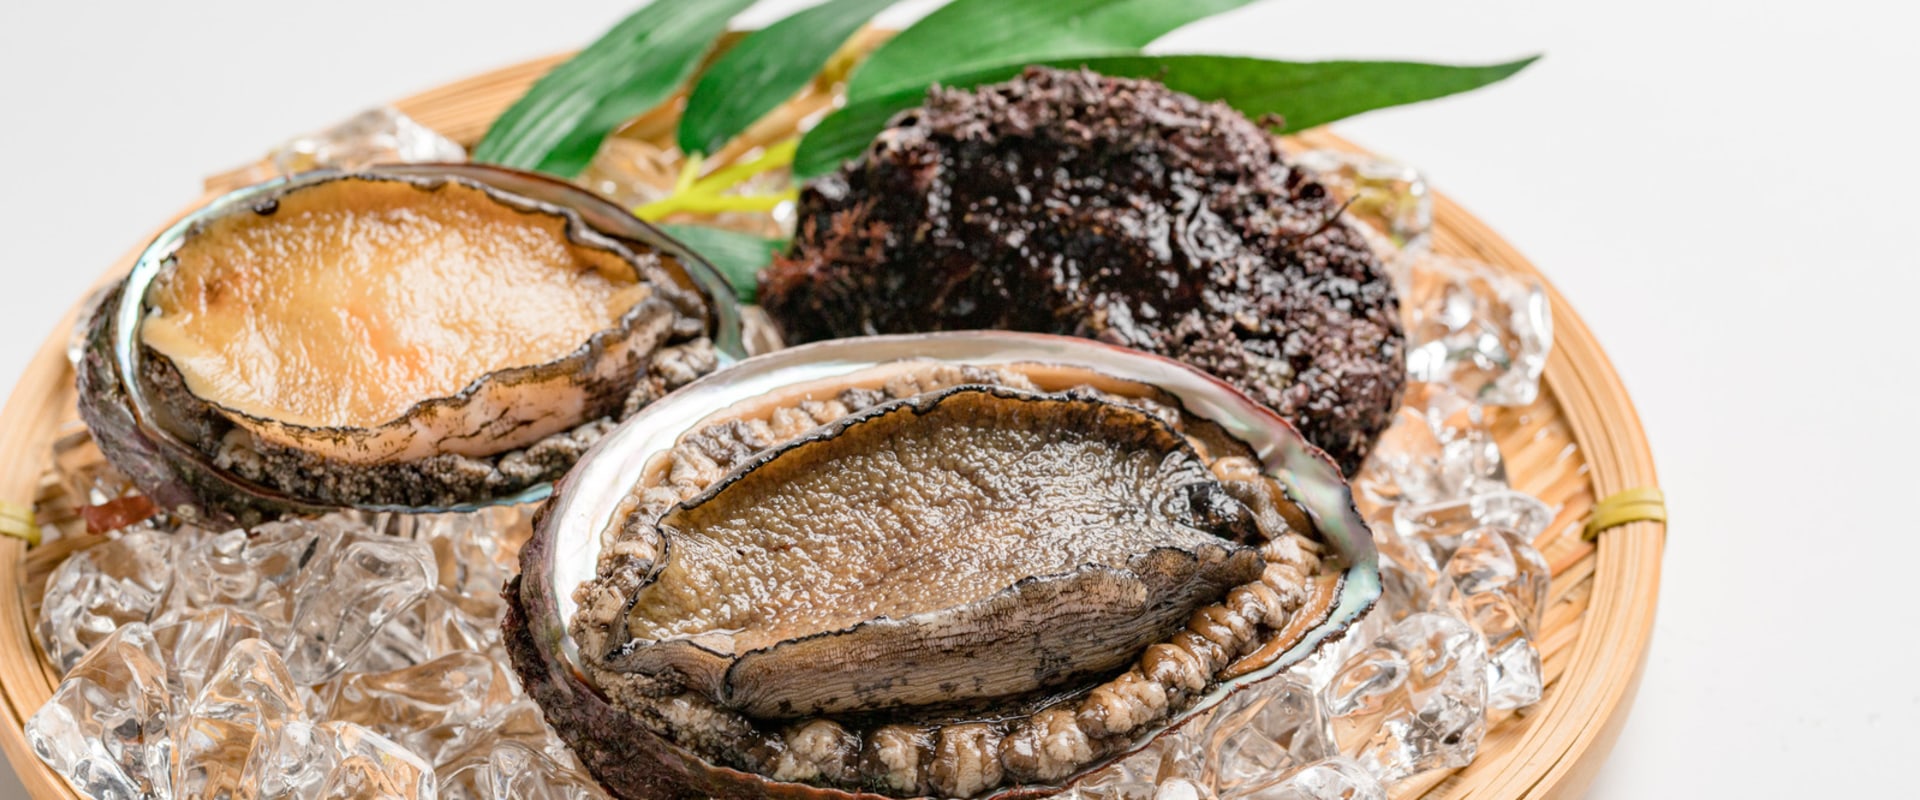 Is abalone really expensive?